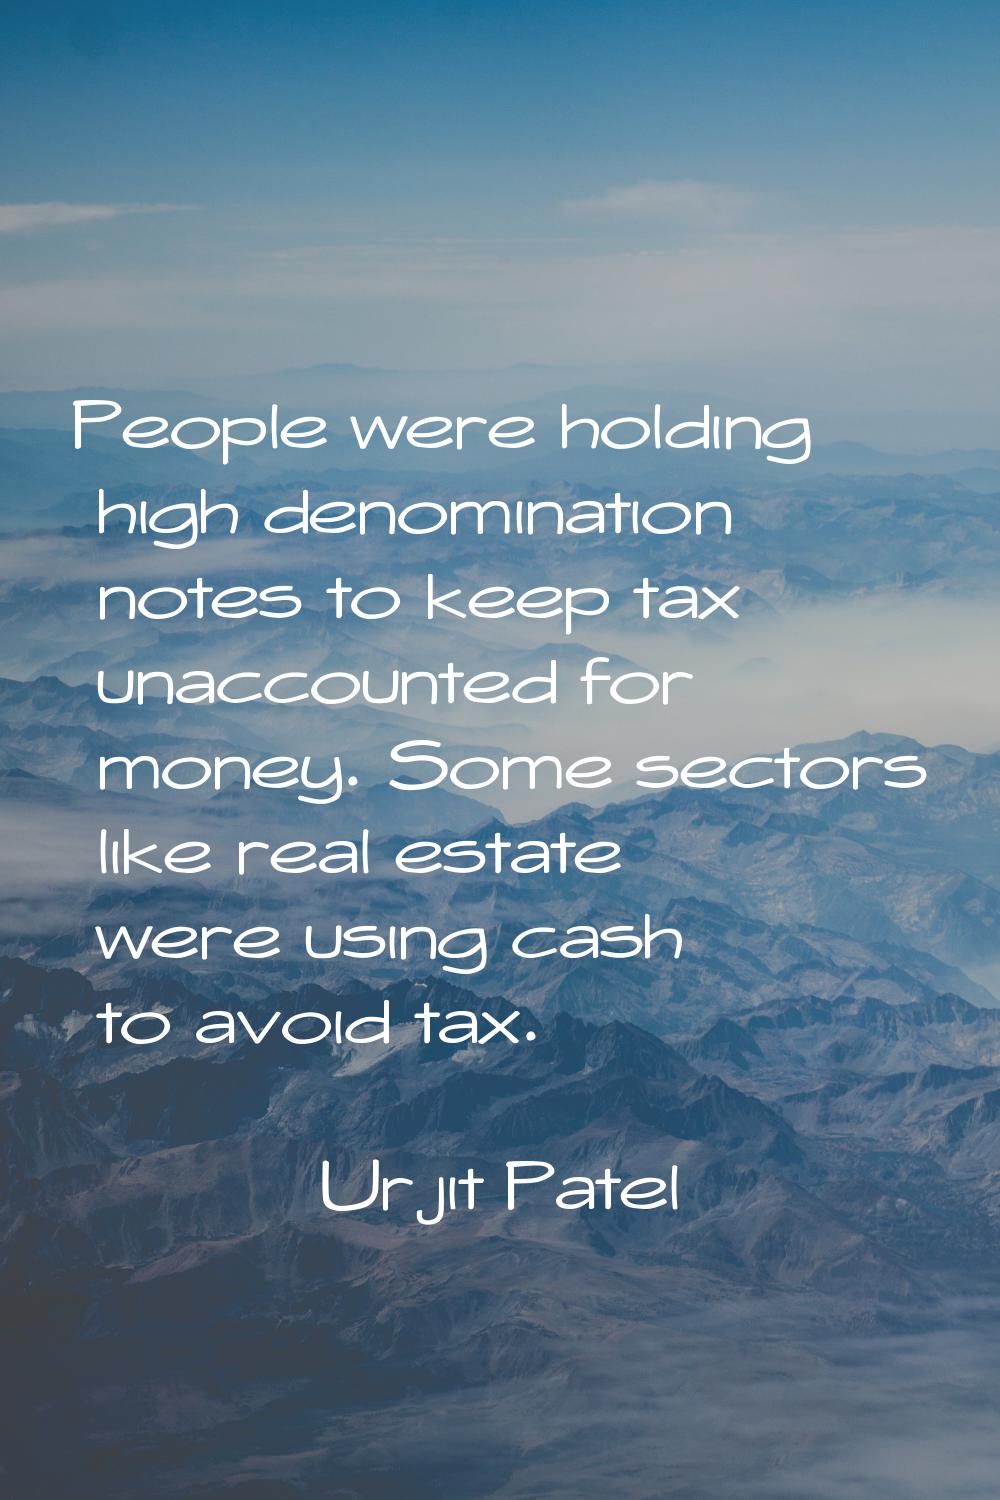 People were holding high denomination notes to keep tax unaccounted for money. Some sectors like re